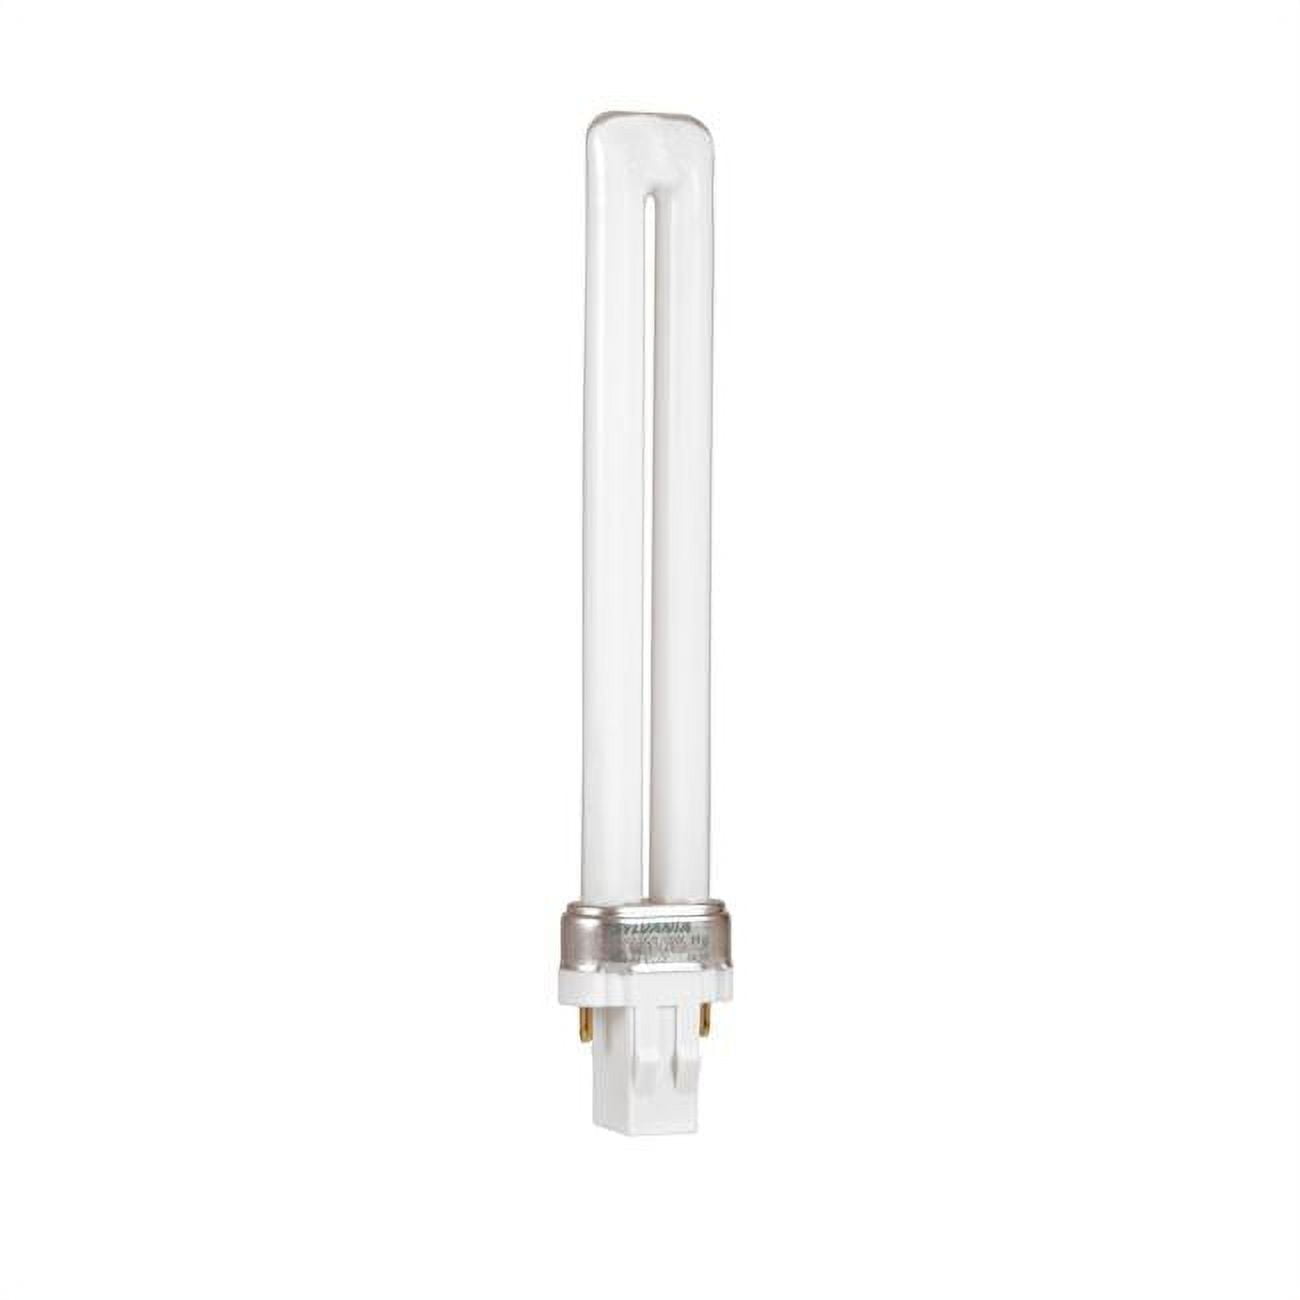 Picture of Sylvania 3008656 0.87 in. Dia. x 1.38 in. 5 watts Dulux Tubular CFL Bulb, Warm White - 2700K